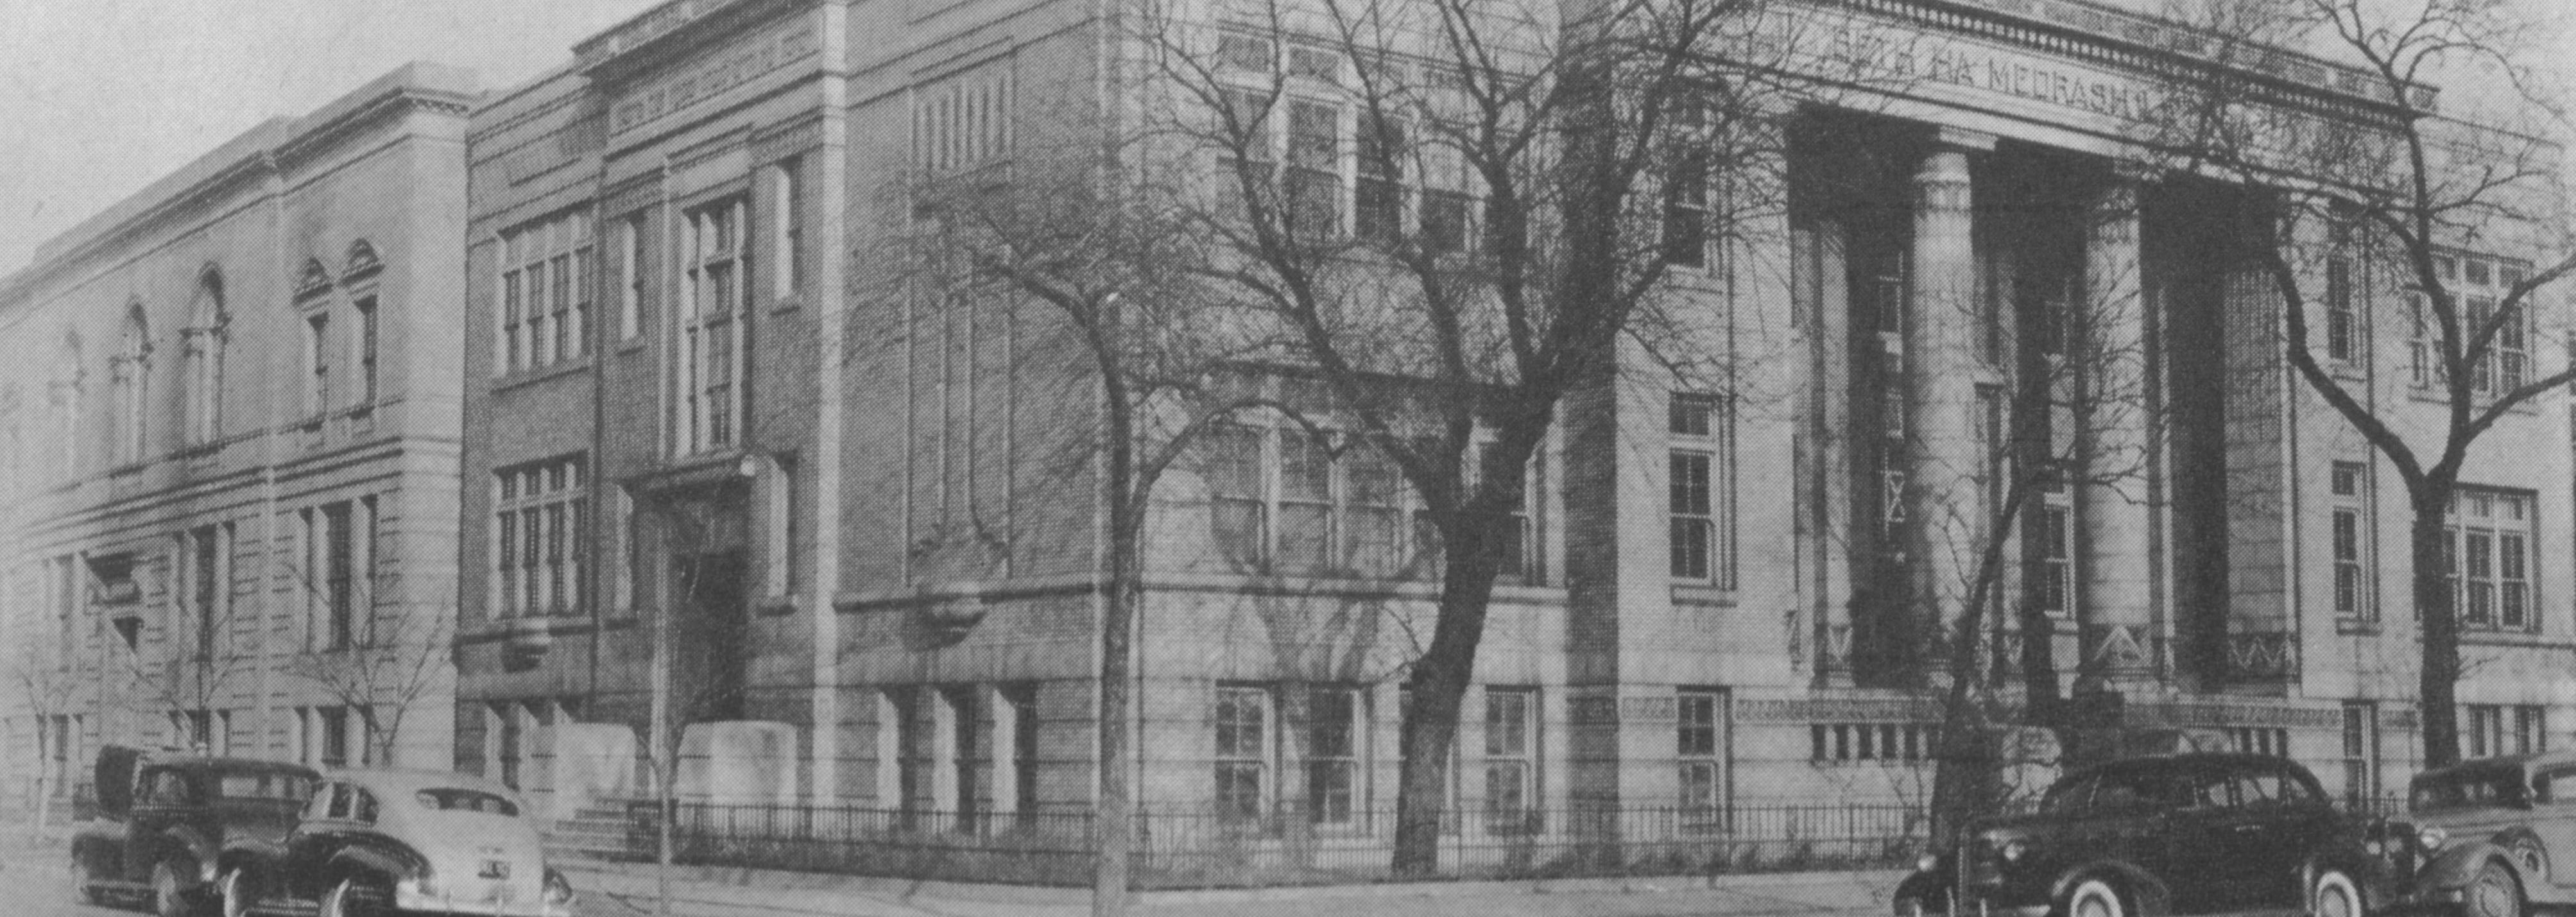 historic photo of the HTC building